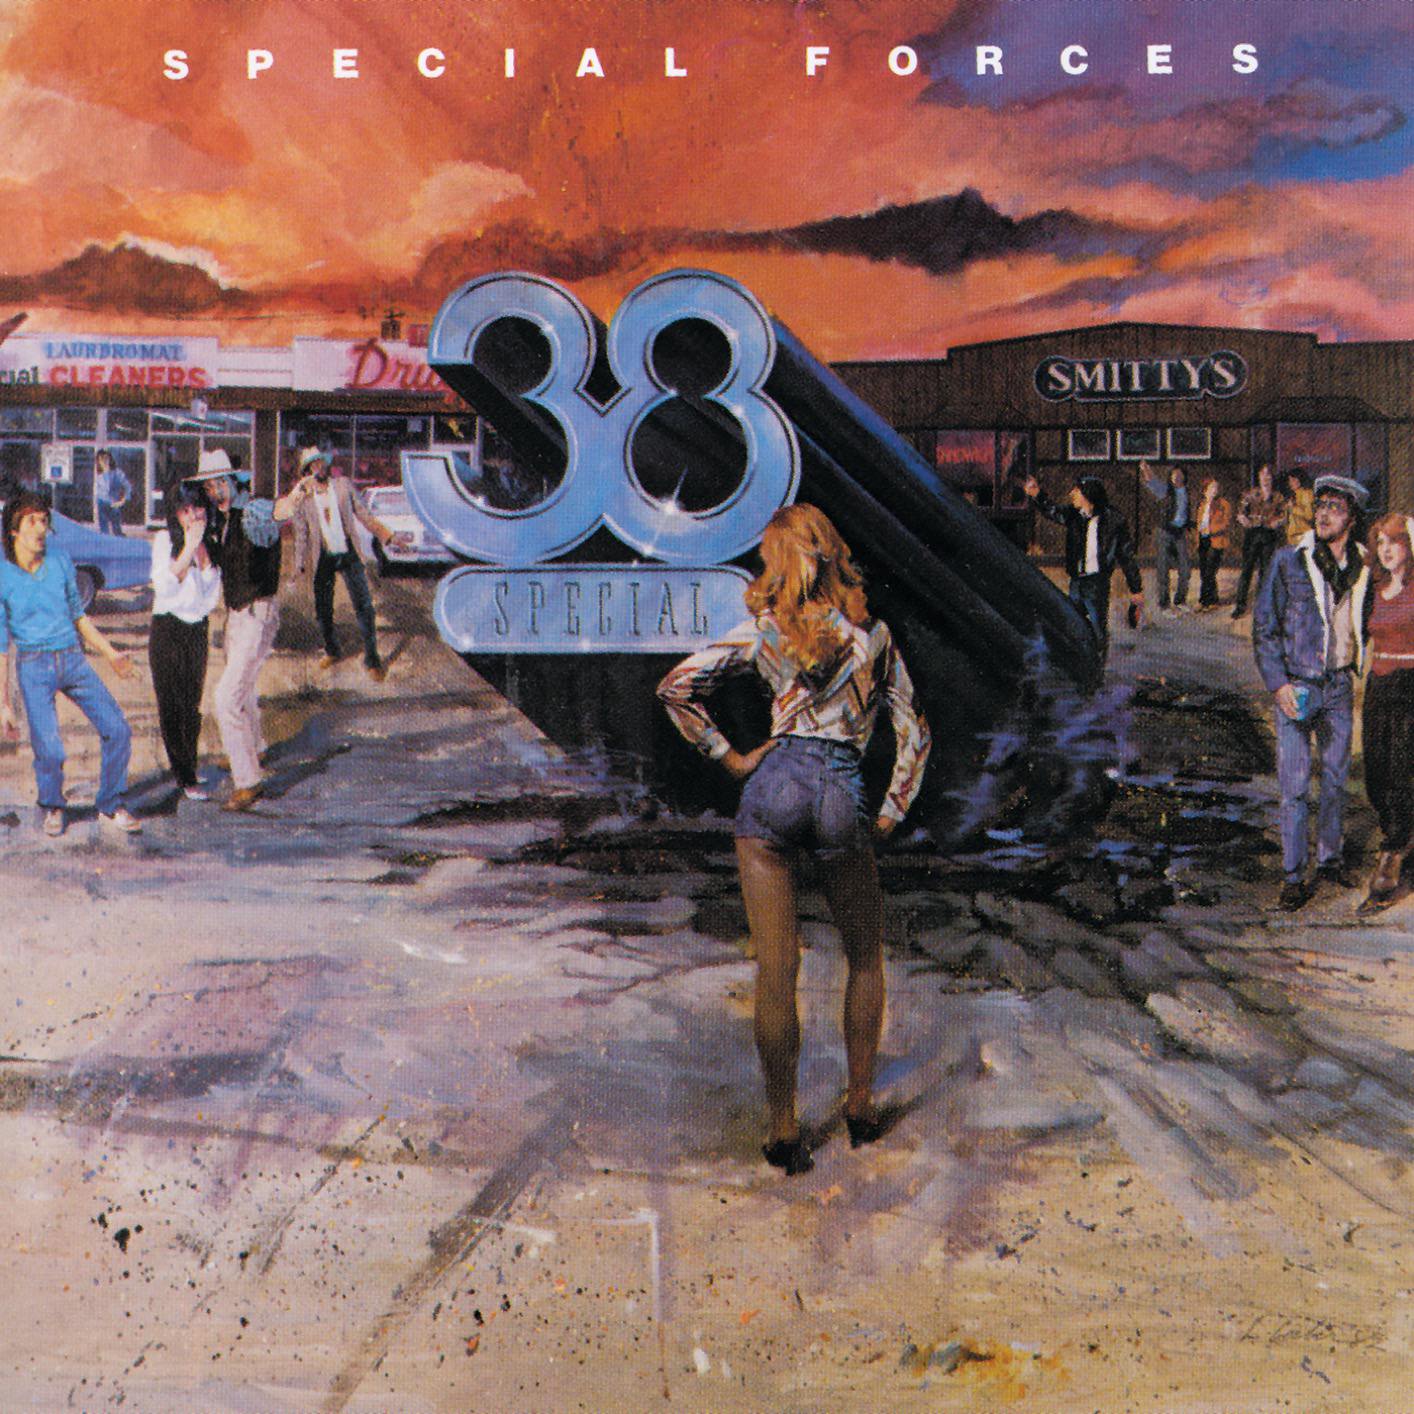 38 Special – Special Forces (1982/2018) [FLAC 24bit/96kHz]